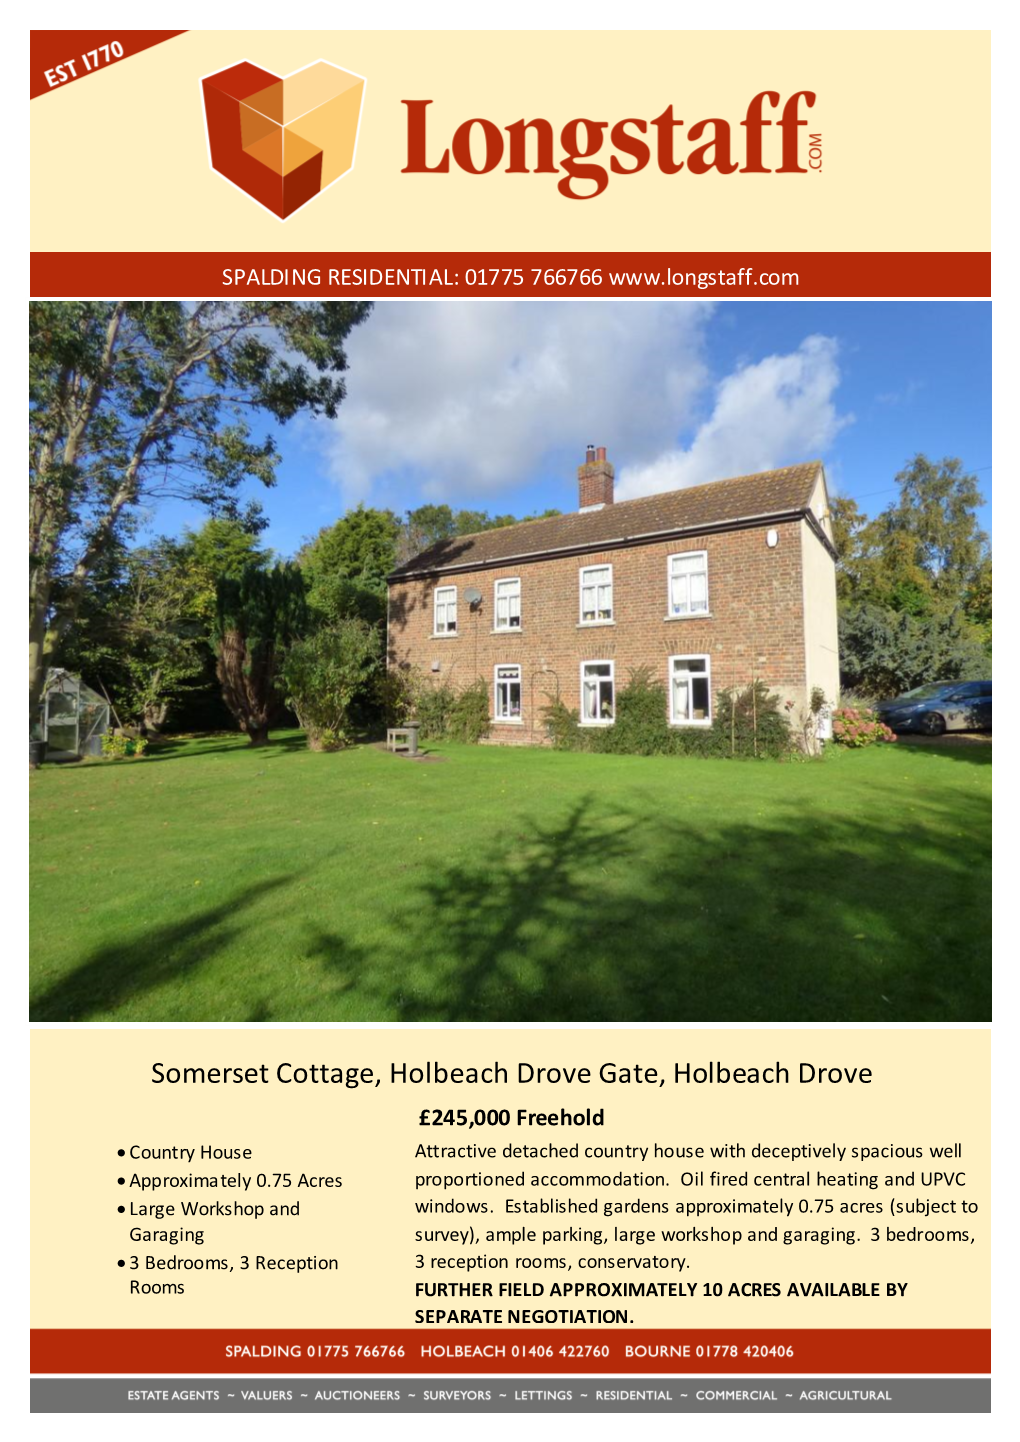 Somerset Cottage, Holbeach Drove Gate, Holbeach Drove £245,000 Freehold  Country House Attractive Detached Country House with Deceptively Spacious Well